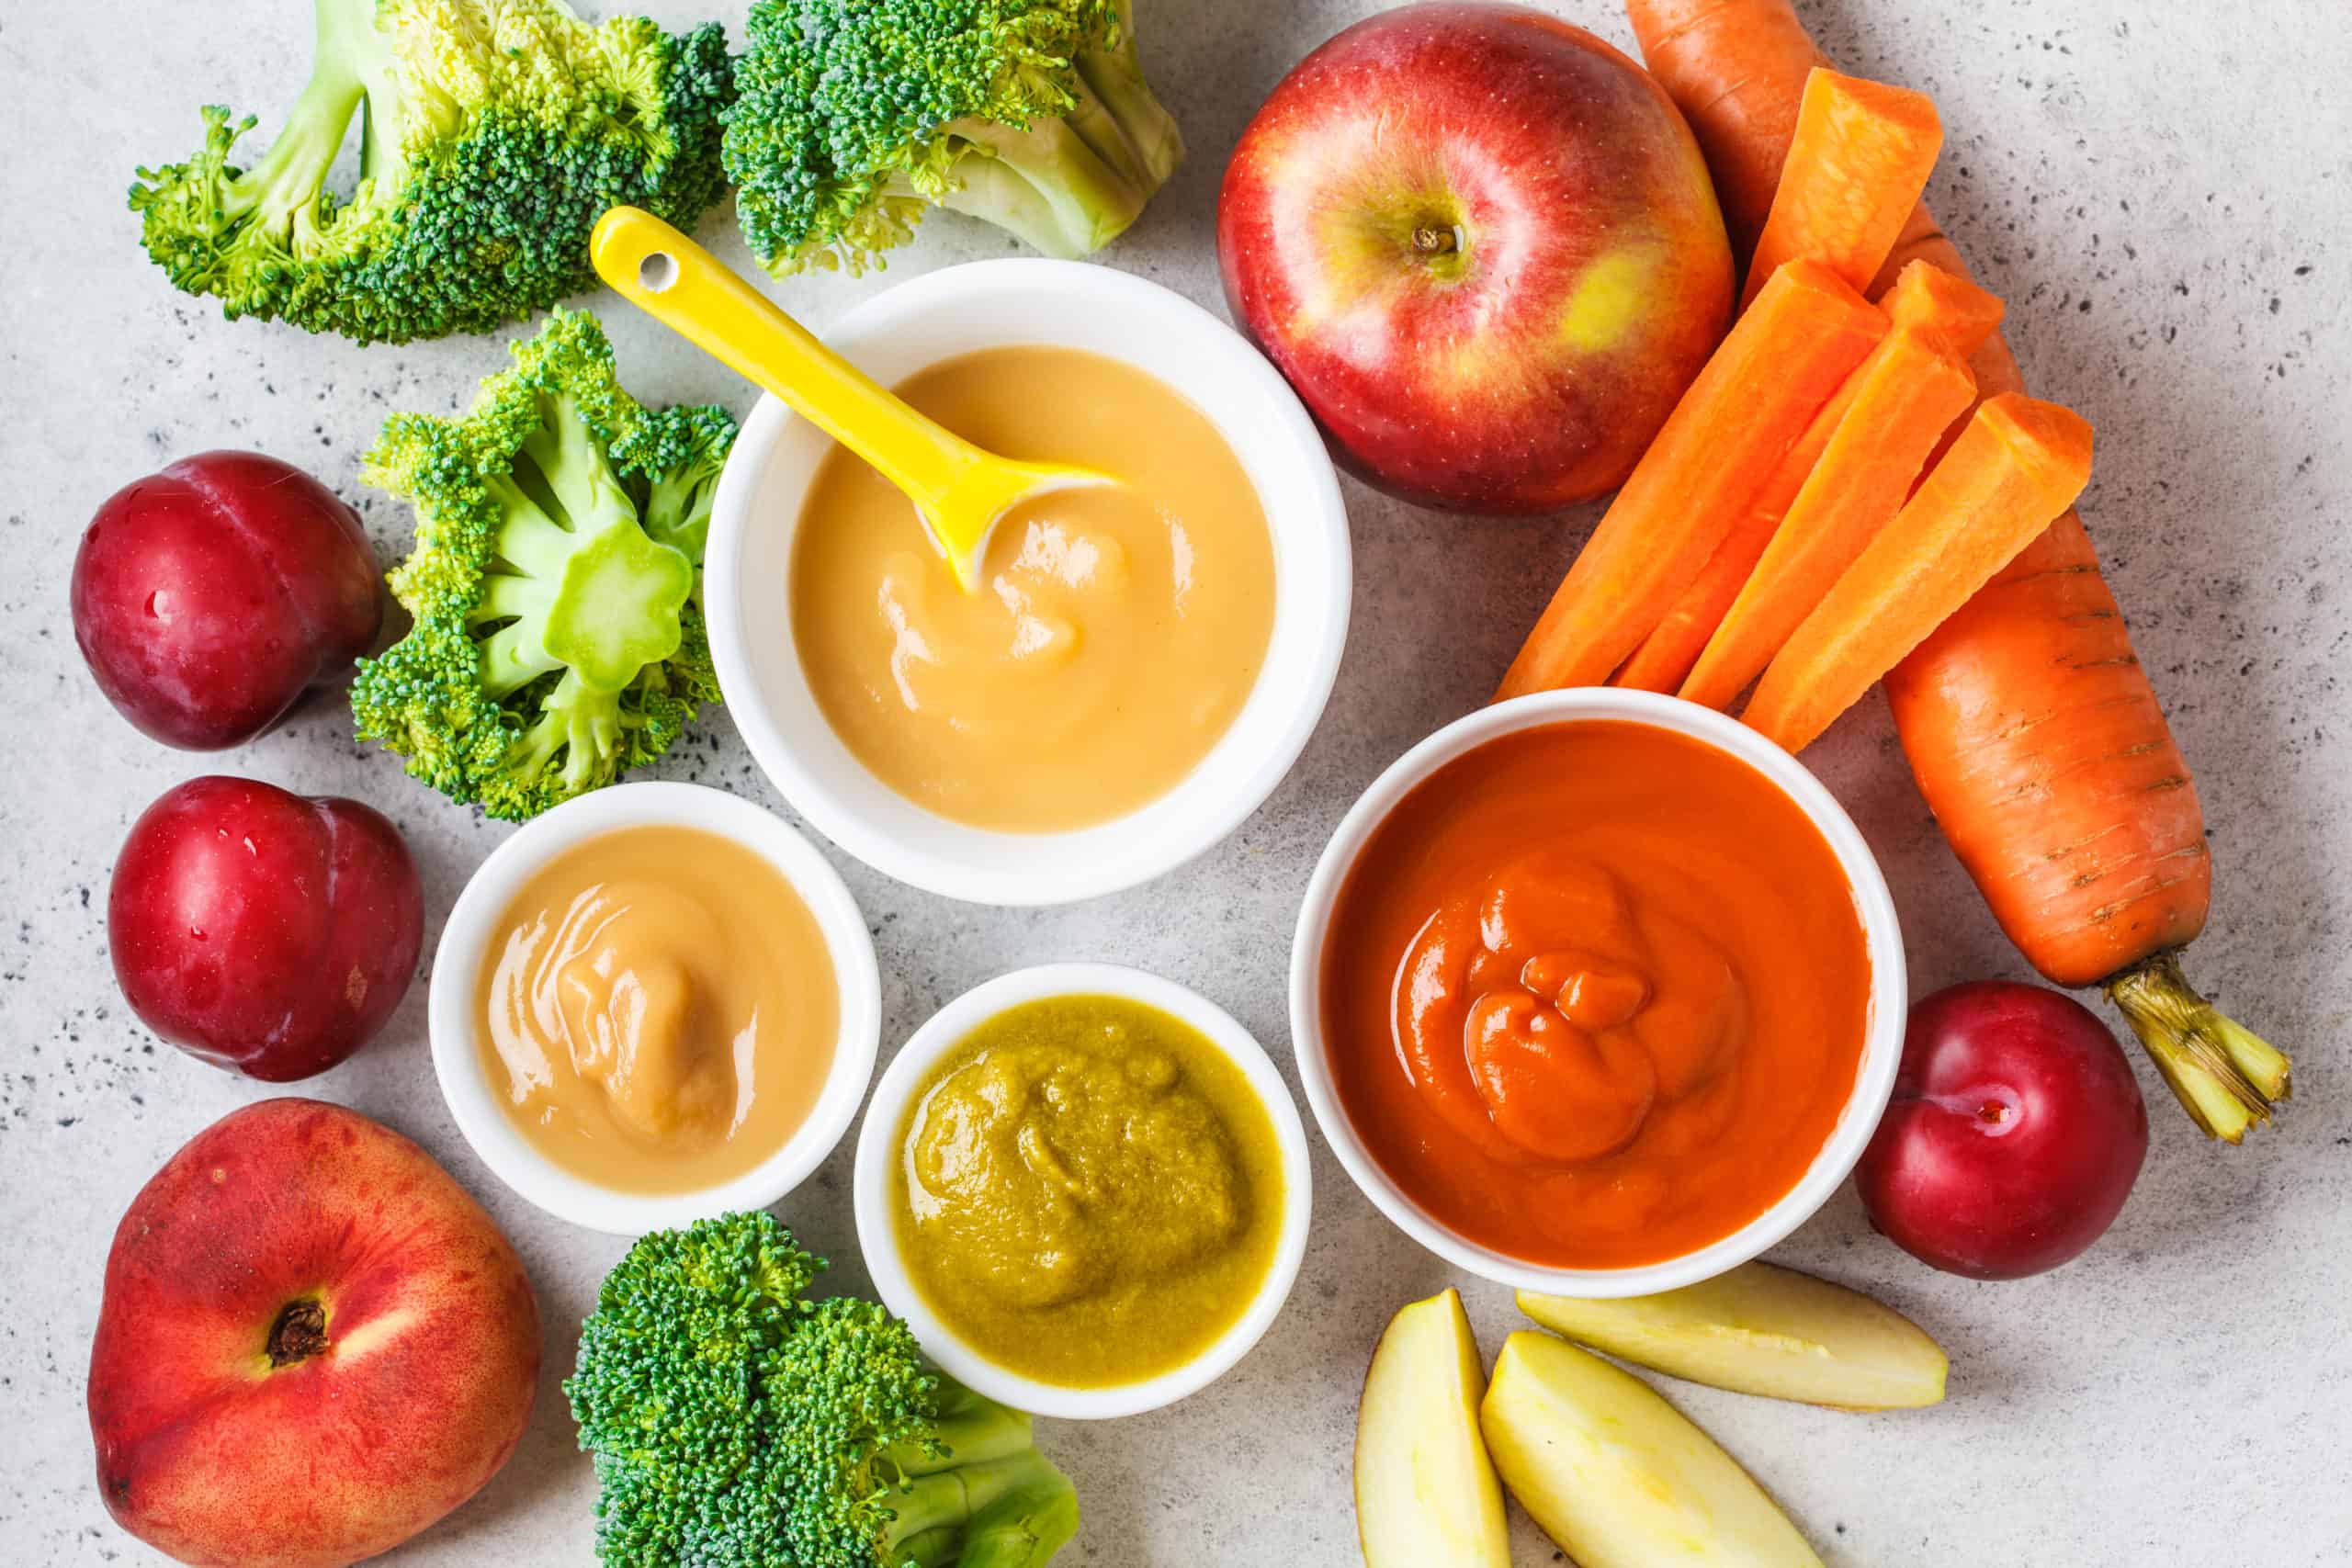 10 of the best Organic baby food recipes 2